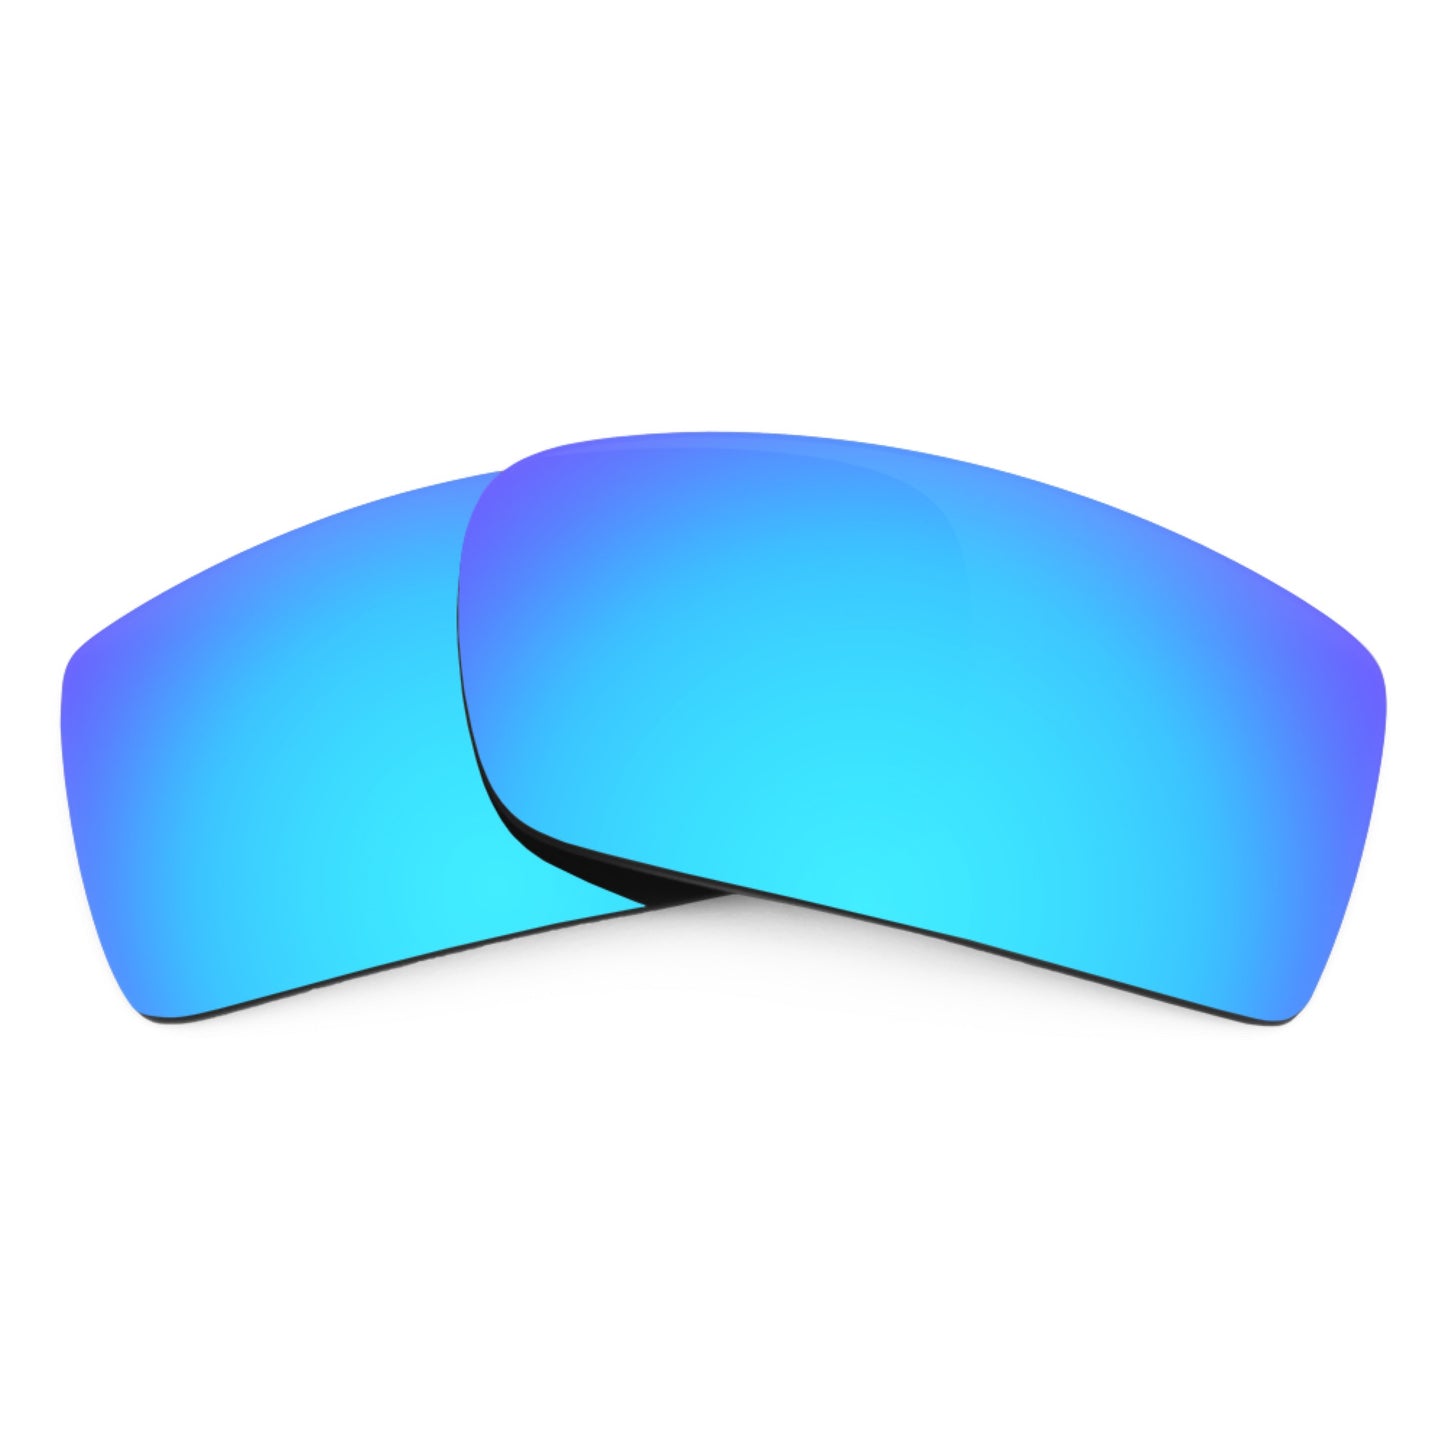 Revant replacement lenses for Ray-Ban RB4107 58mm Non-Polarized Ice Blue